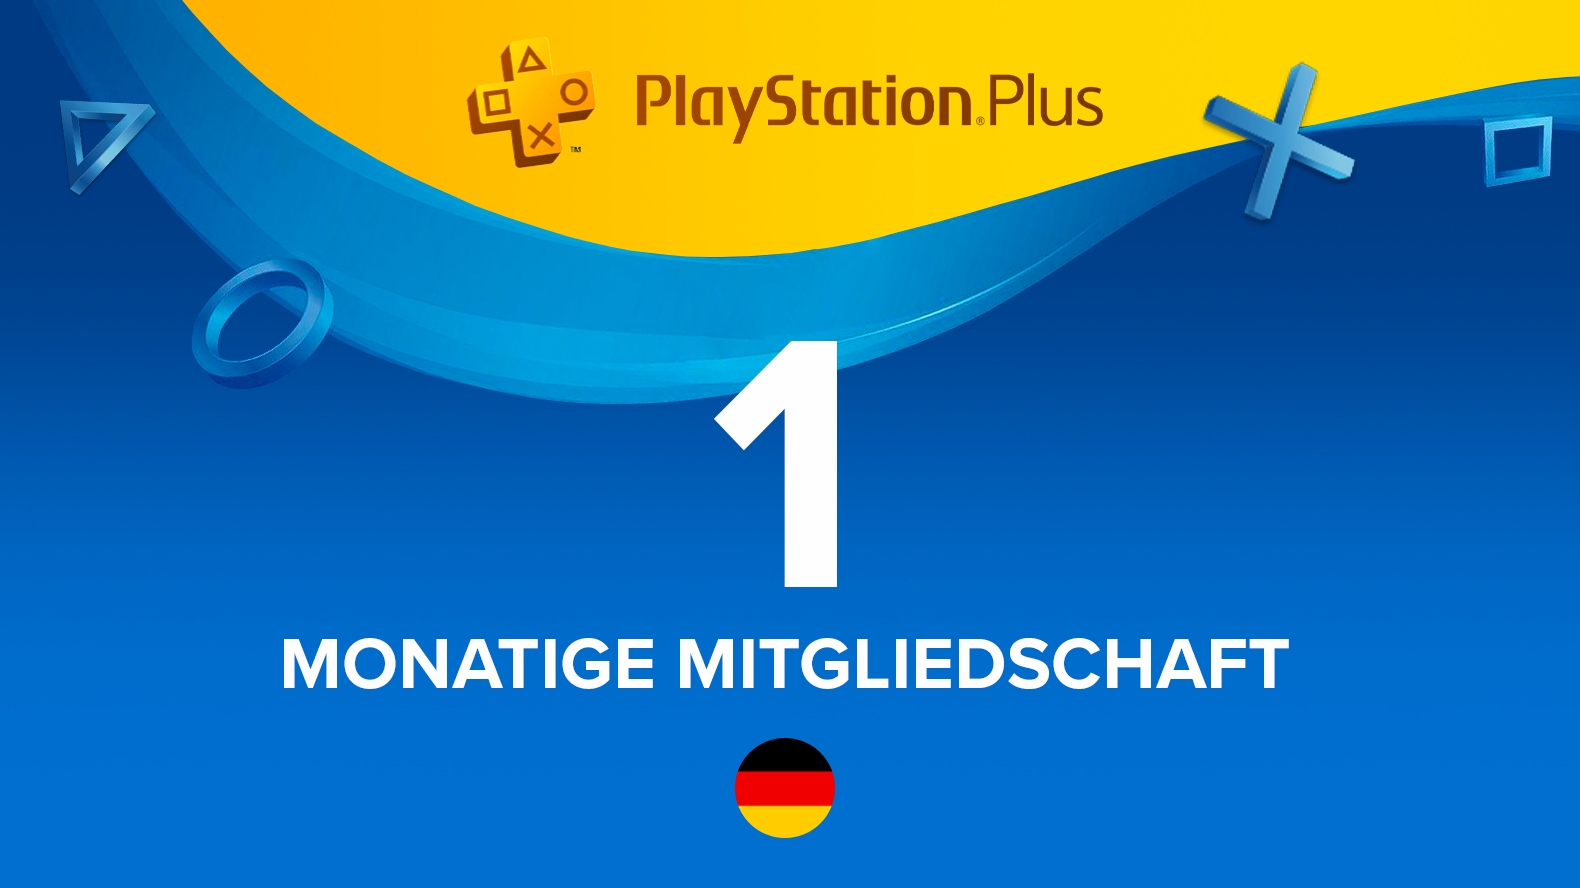 1 month playstation plus price